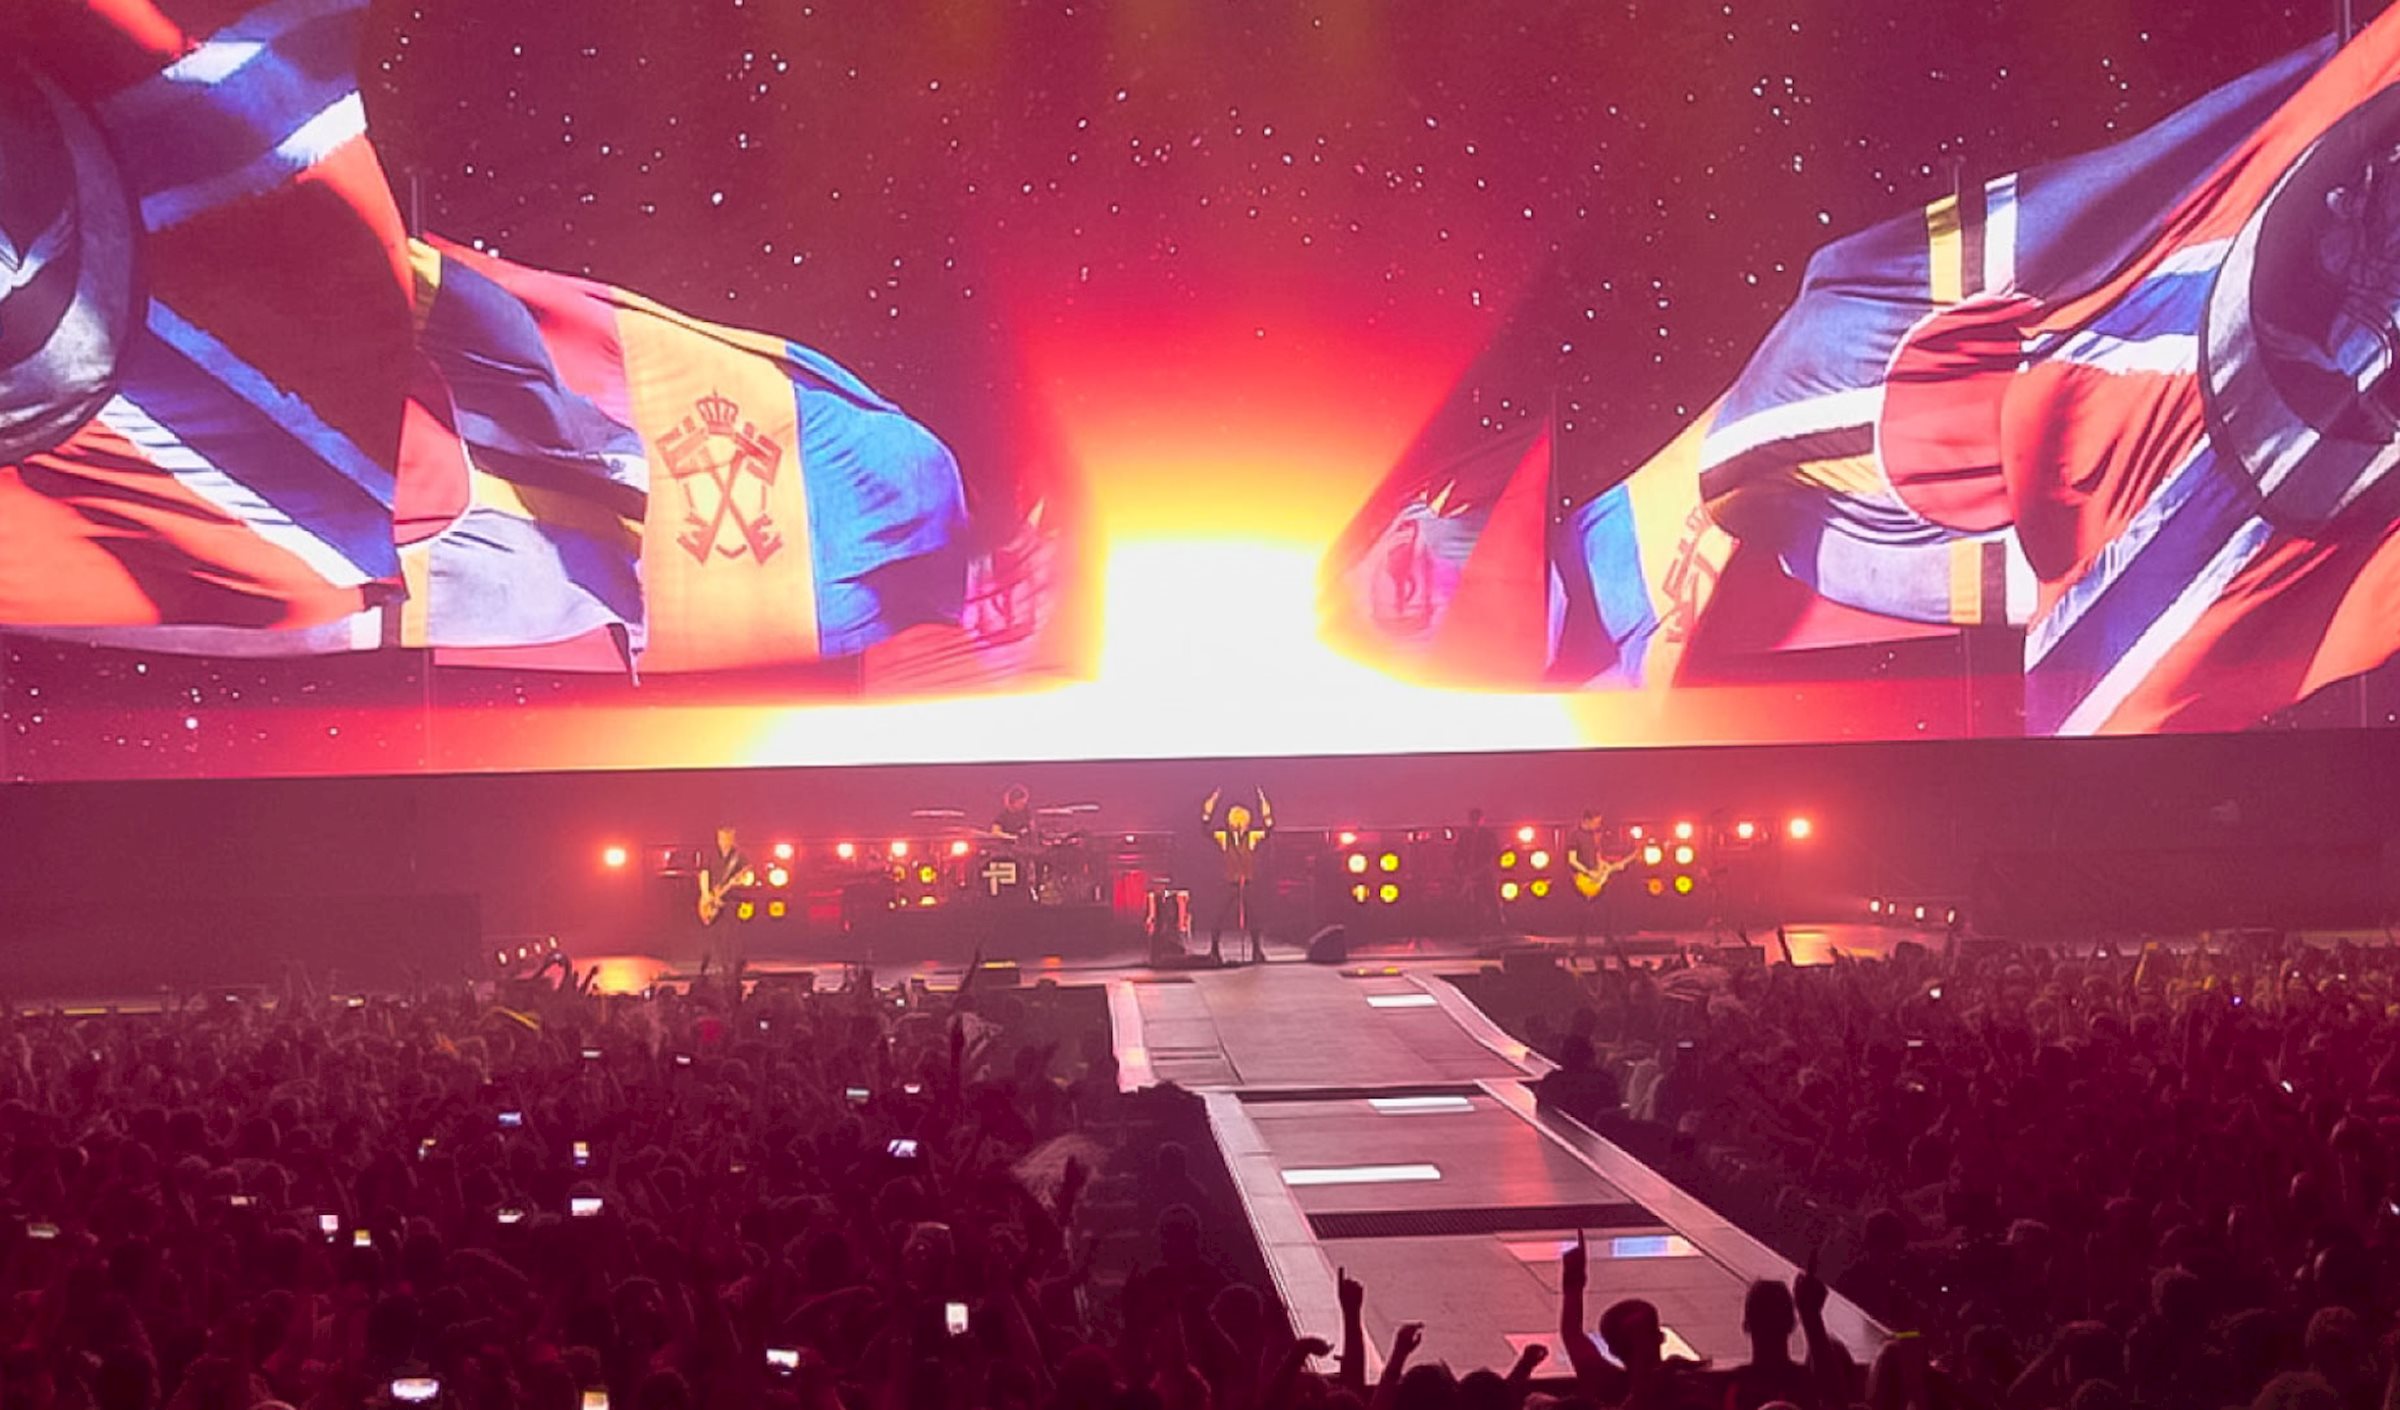 For the closing show of Indochine’s “13 Tour”, over 50 000 fans came to Lille to experience the immersive show supported by PRG as Technical service Provider.